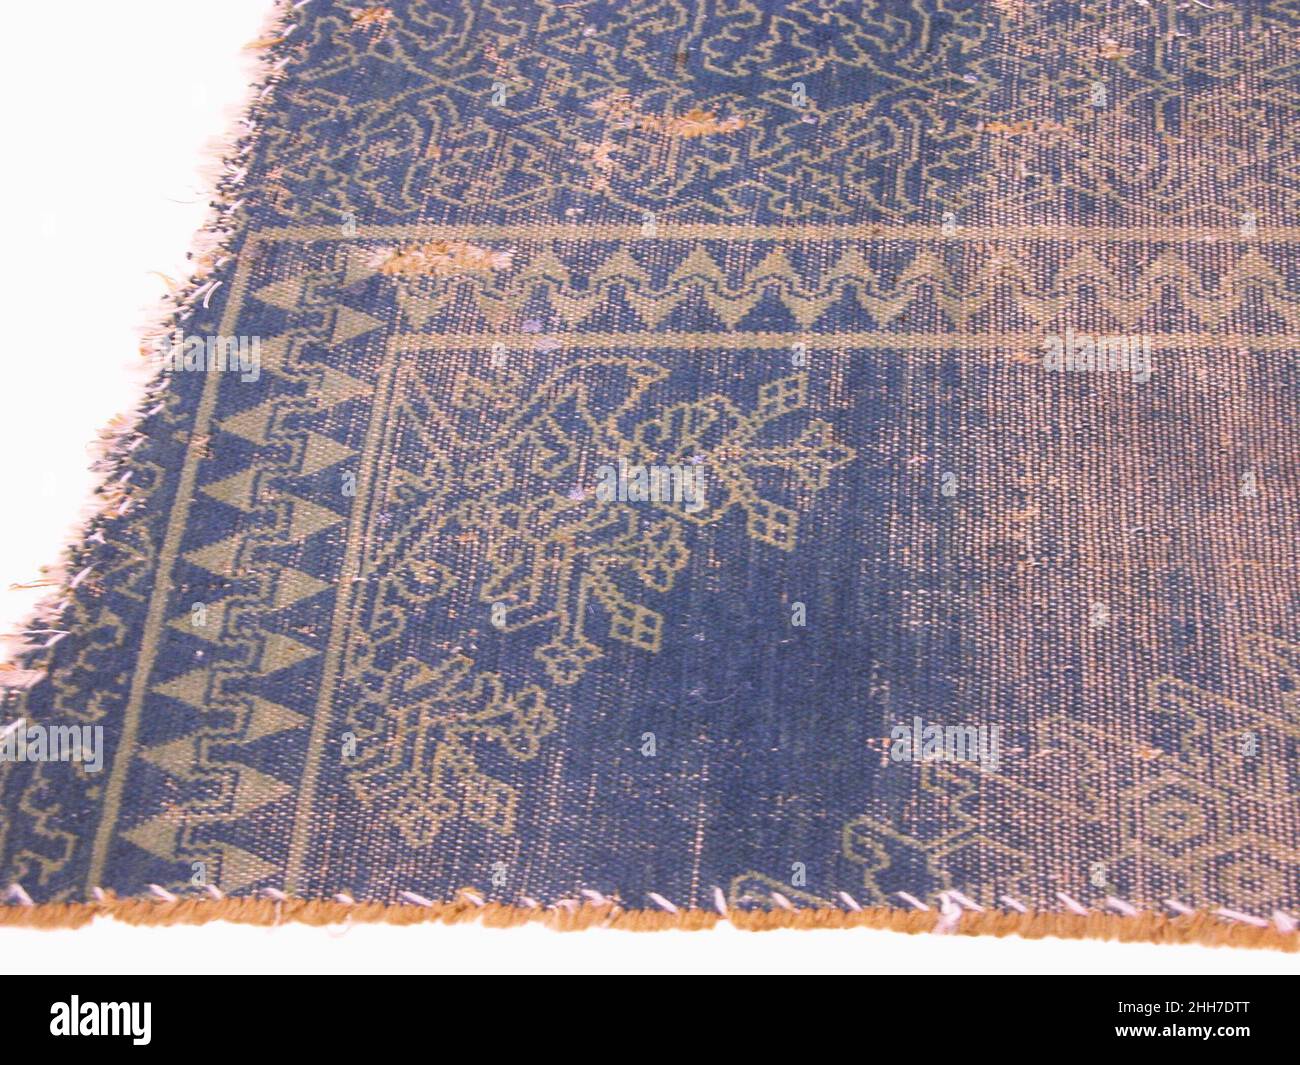 Carpet Fragment 16th century This fragment depicts a variety of vegetal forms, including scrolling leaf and vines along the border, as well as a popular blossom or pomegranate-style design inside an alternating pyramidal merlon border.. Carpet Fragment  451462 Stock Photo